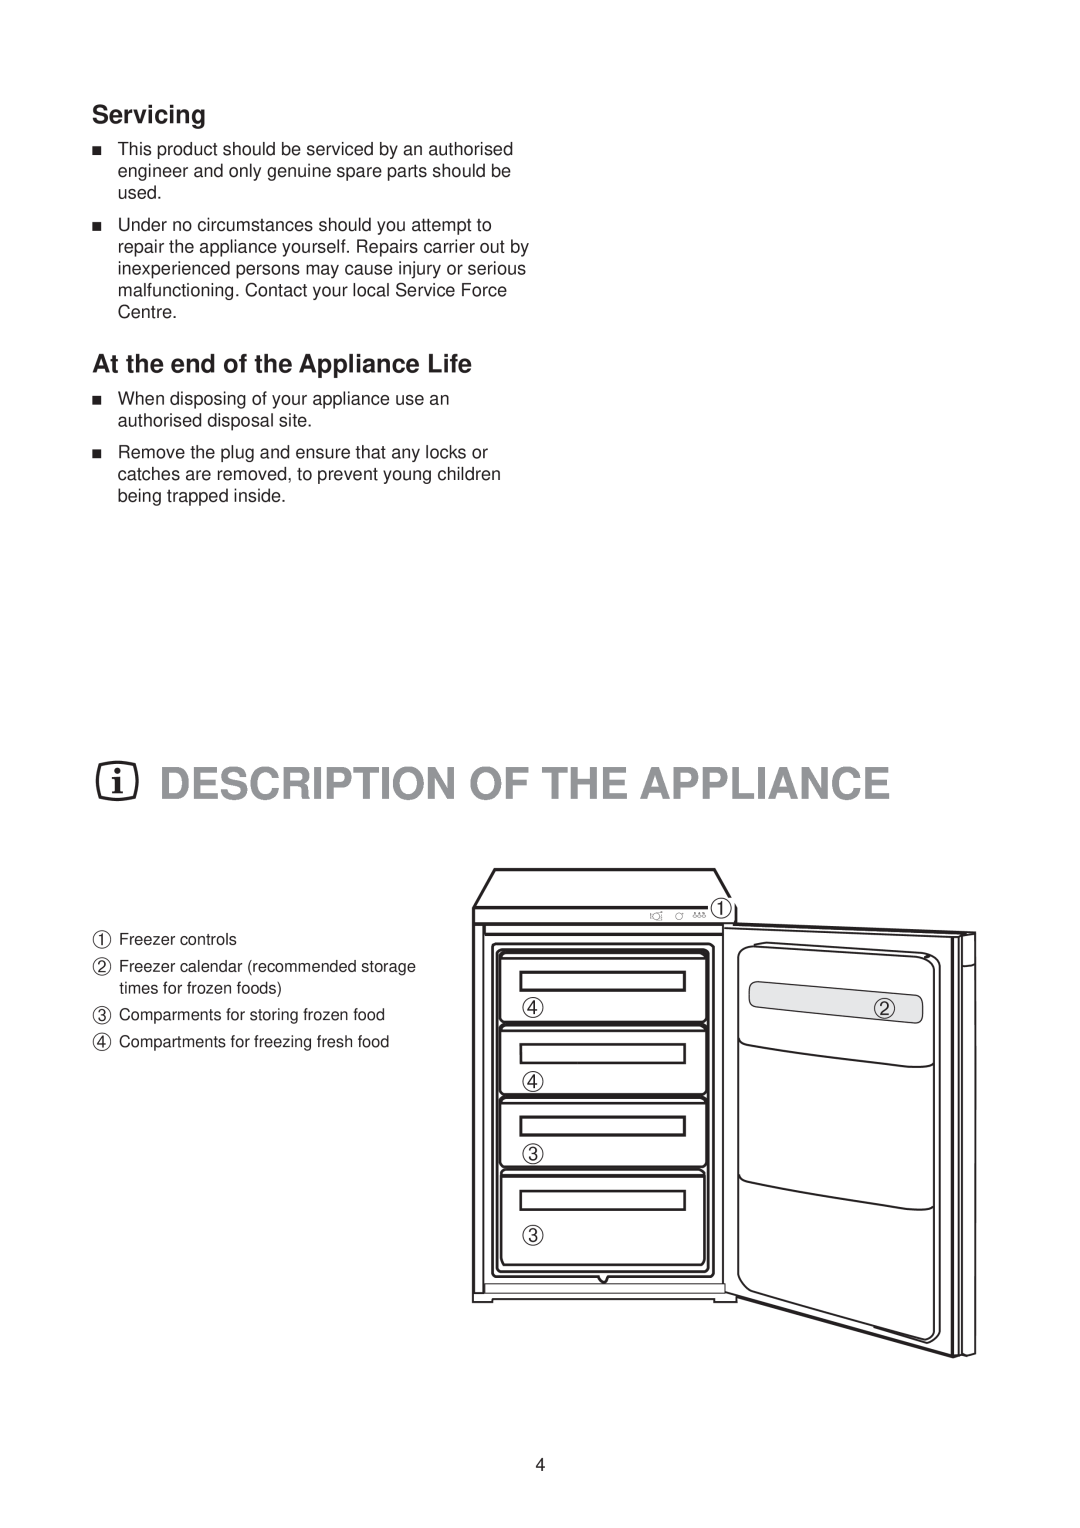 Zanussi ZVR 47 R manual Description Of The Appliance, Servicing, At the end of the Appliance Life 